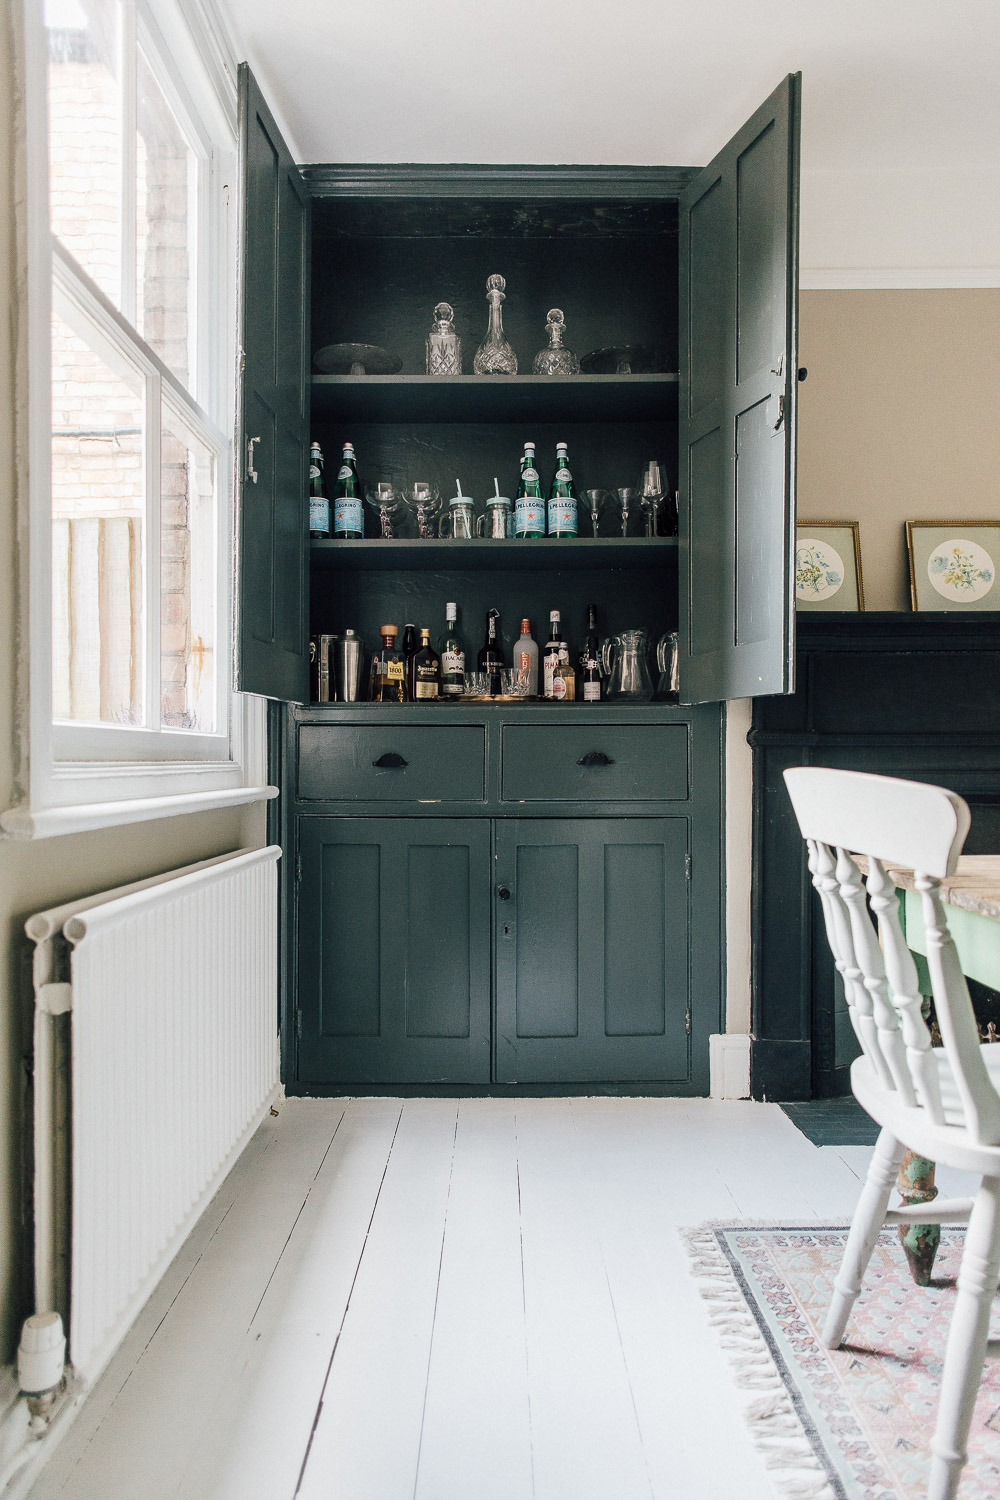 Alcove cupboard bar painted in Farrow and Ball